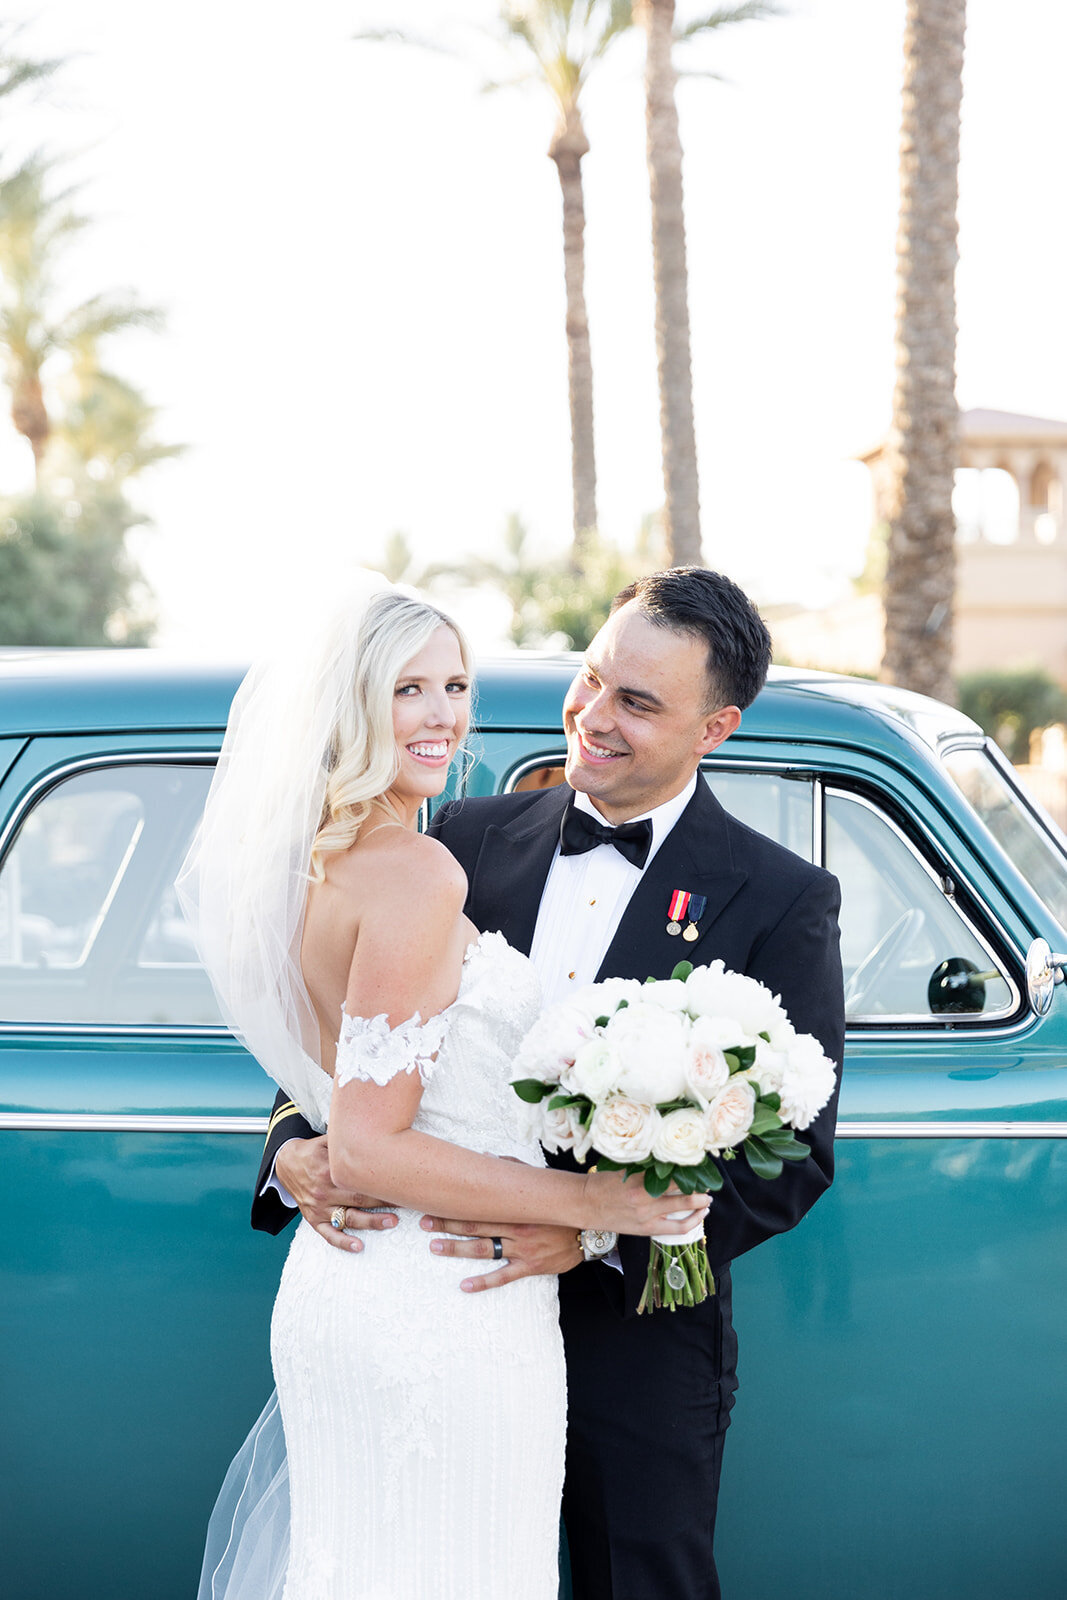 Karlie Colleen Photography - Holly & Ronnie Wedding - Seville Country Club - Gilbert Arizona-703